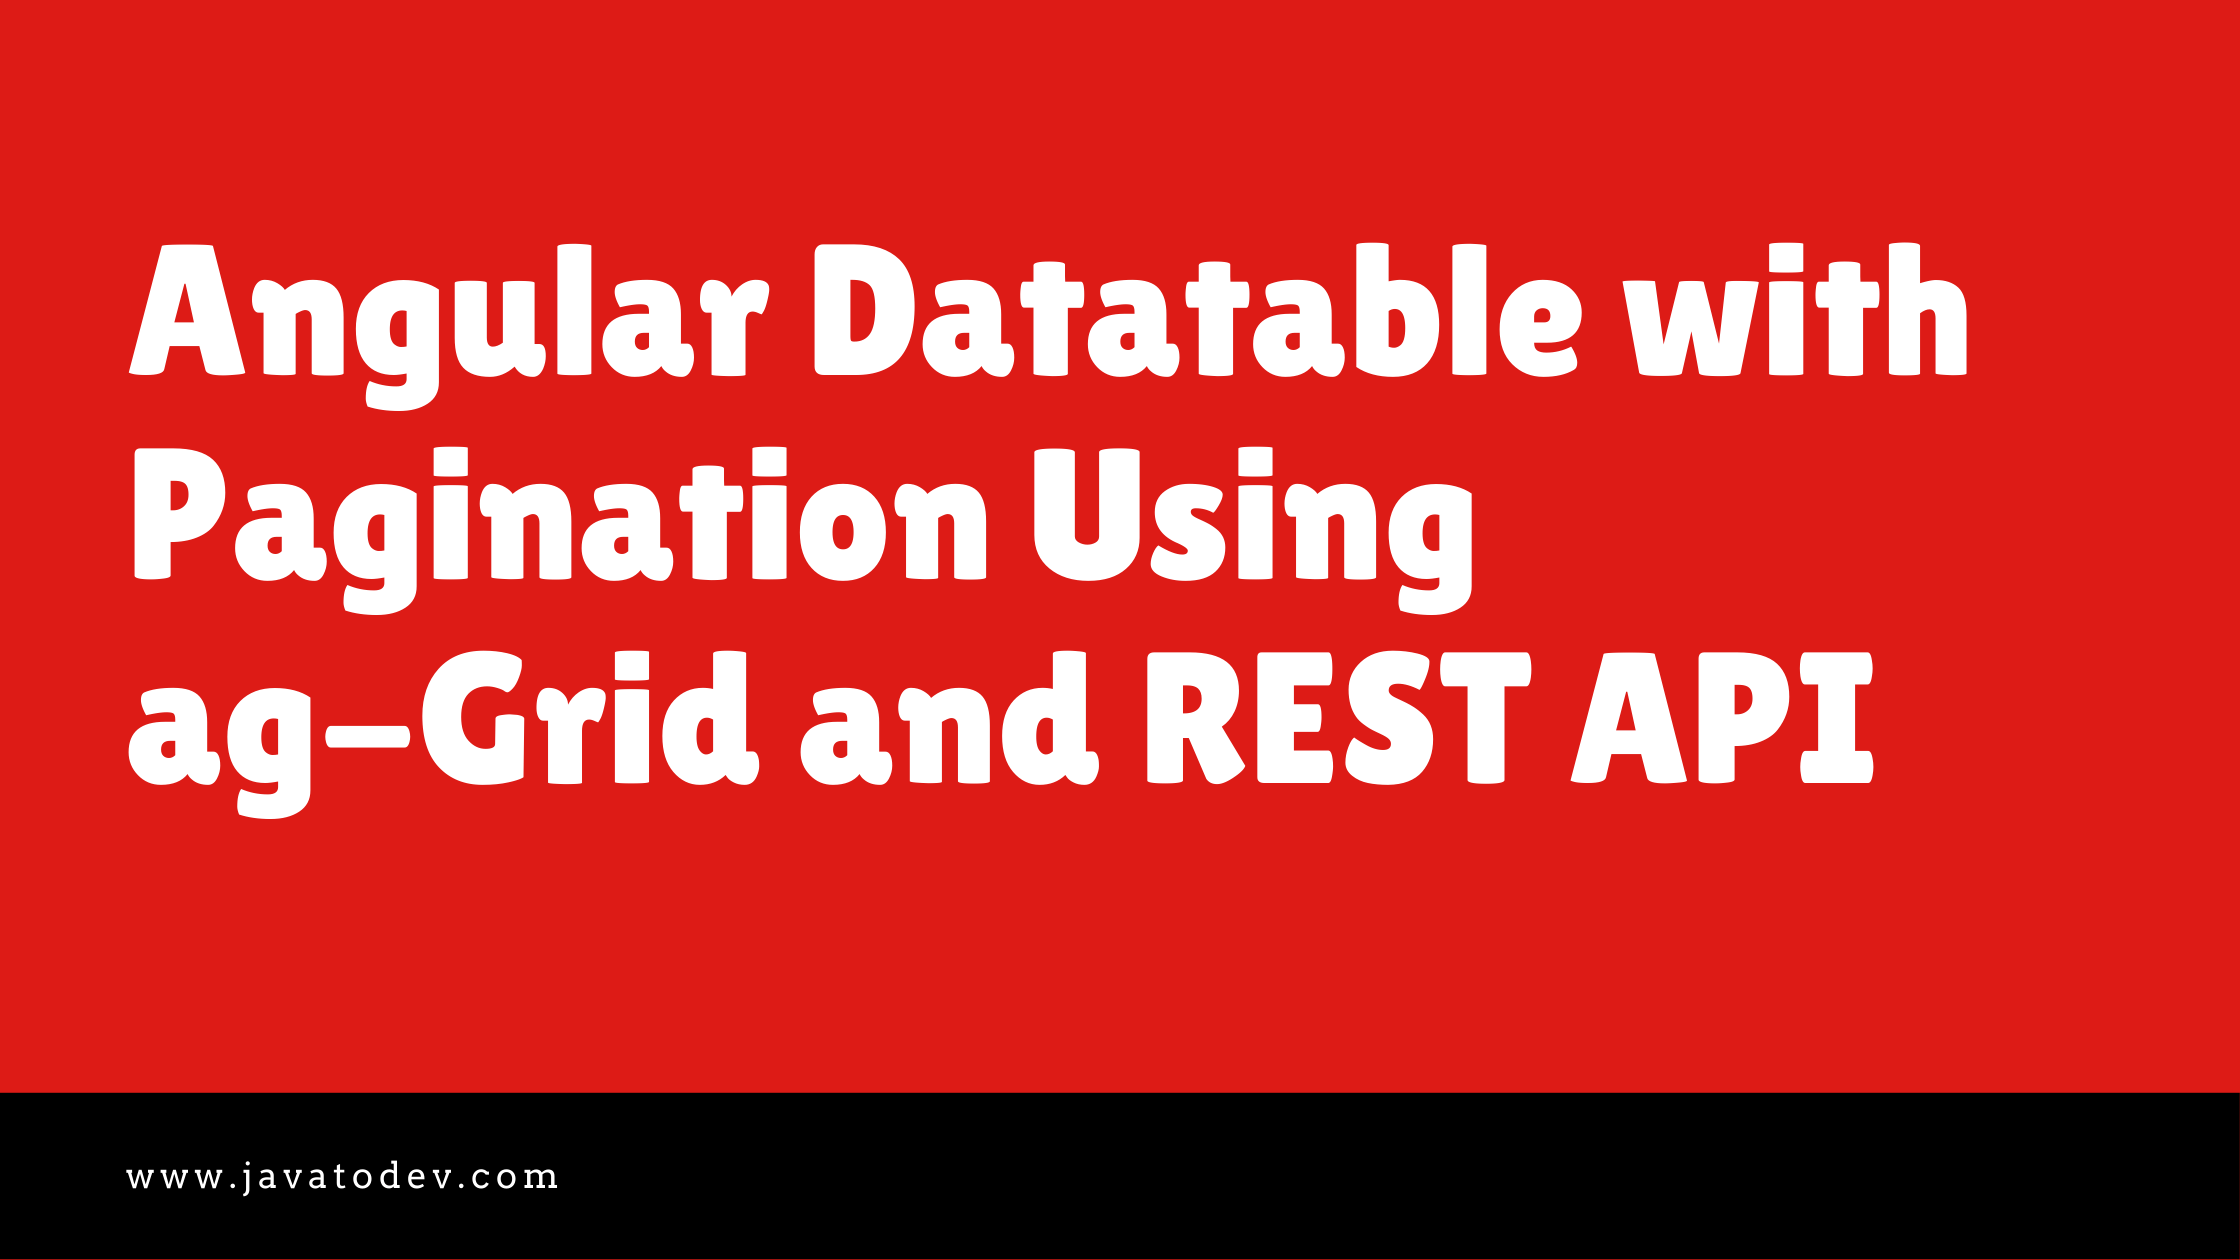 Angular Datatable with Pagination Using ag-Grid and REST API